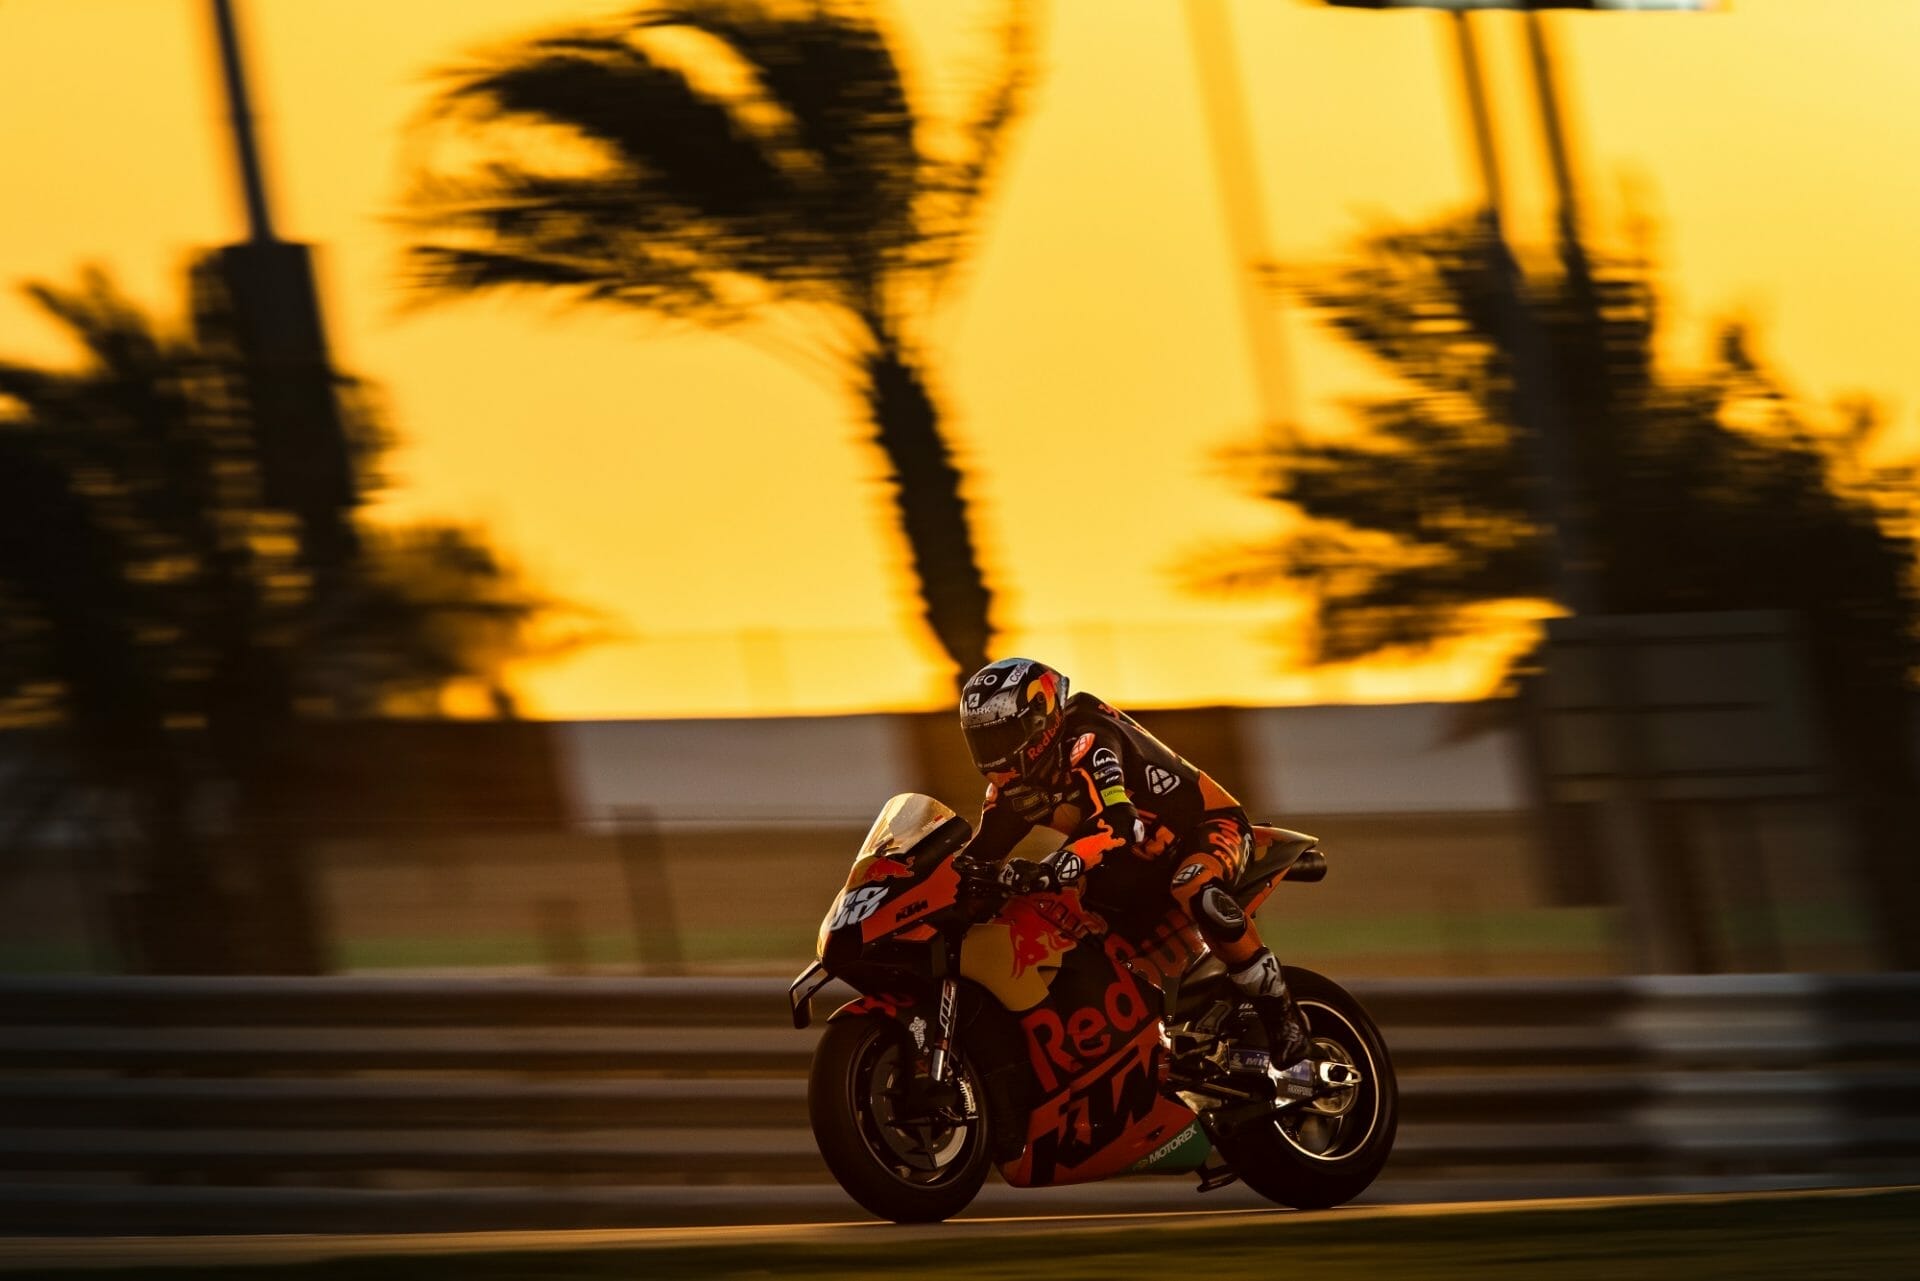 MotoGP tests in Qatar
- also in the MOTORCYCLES.NEWS APP